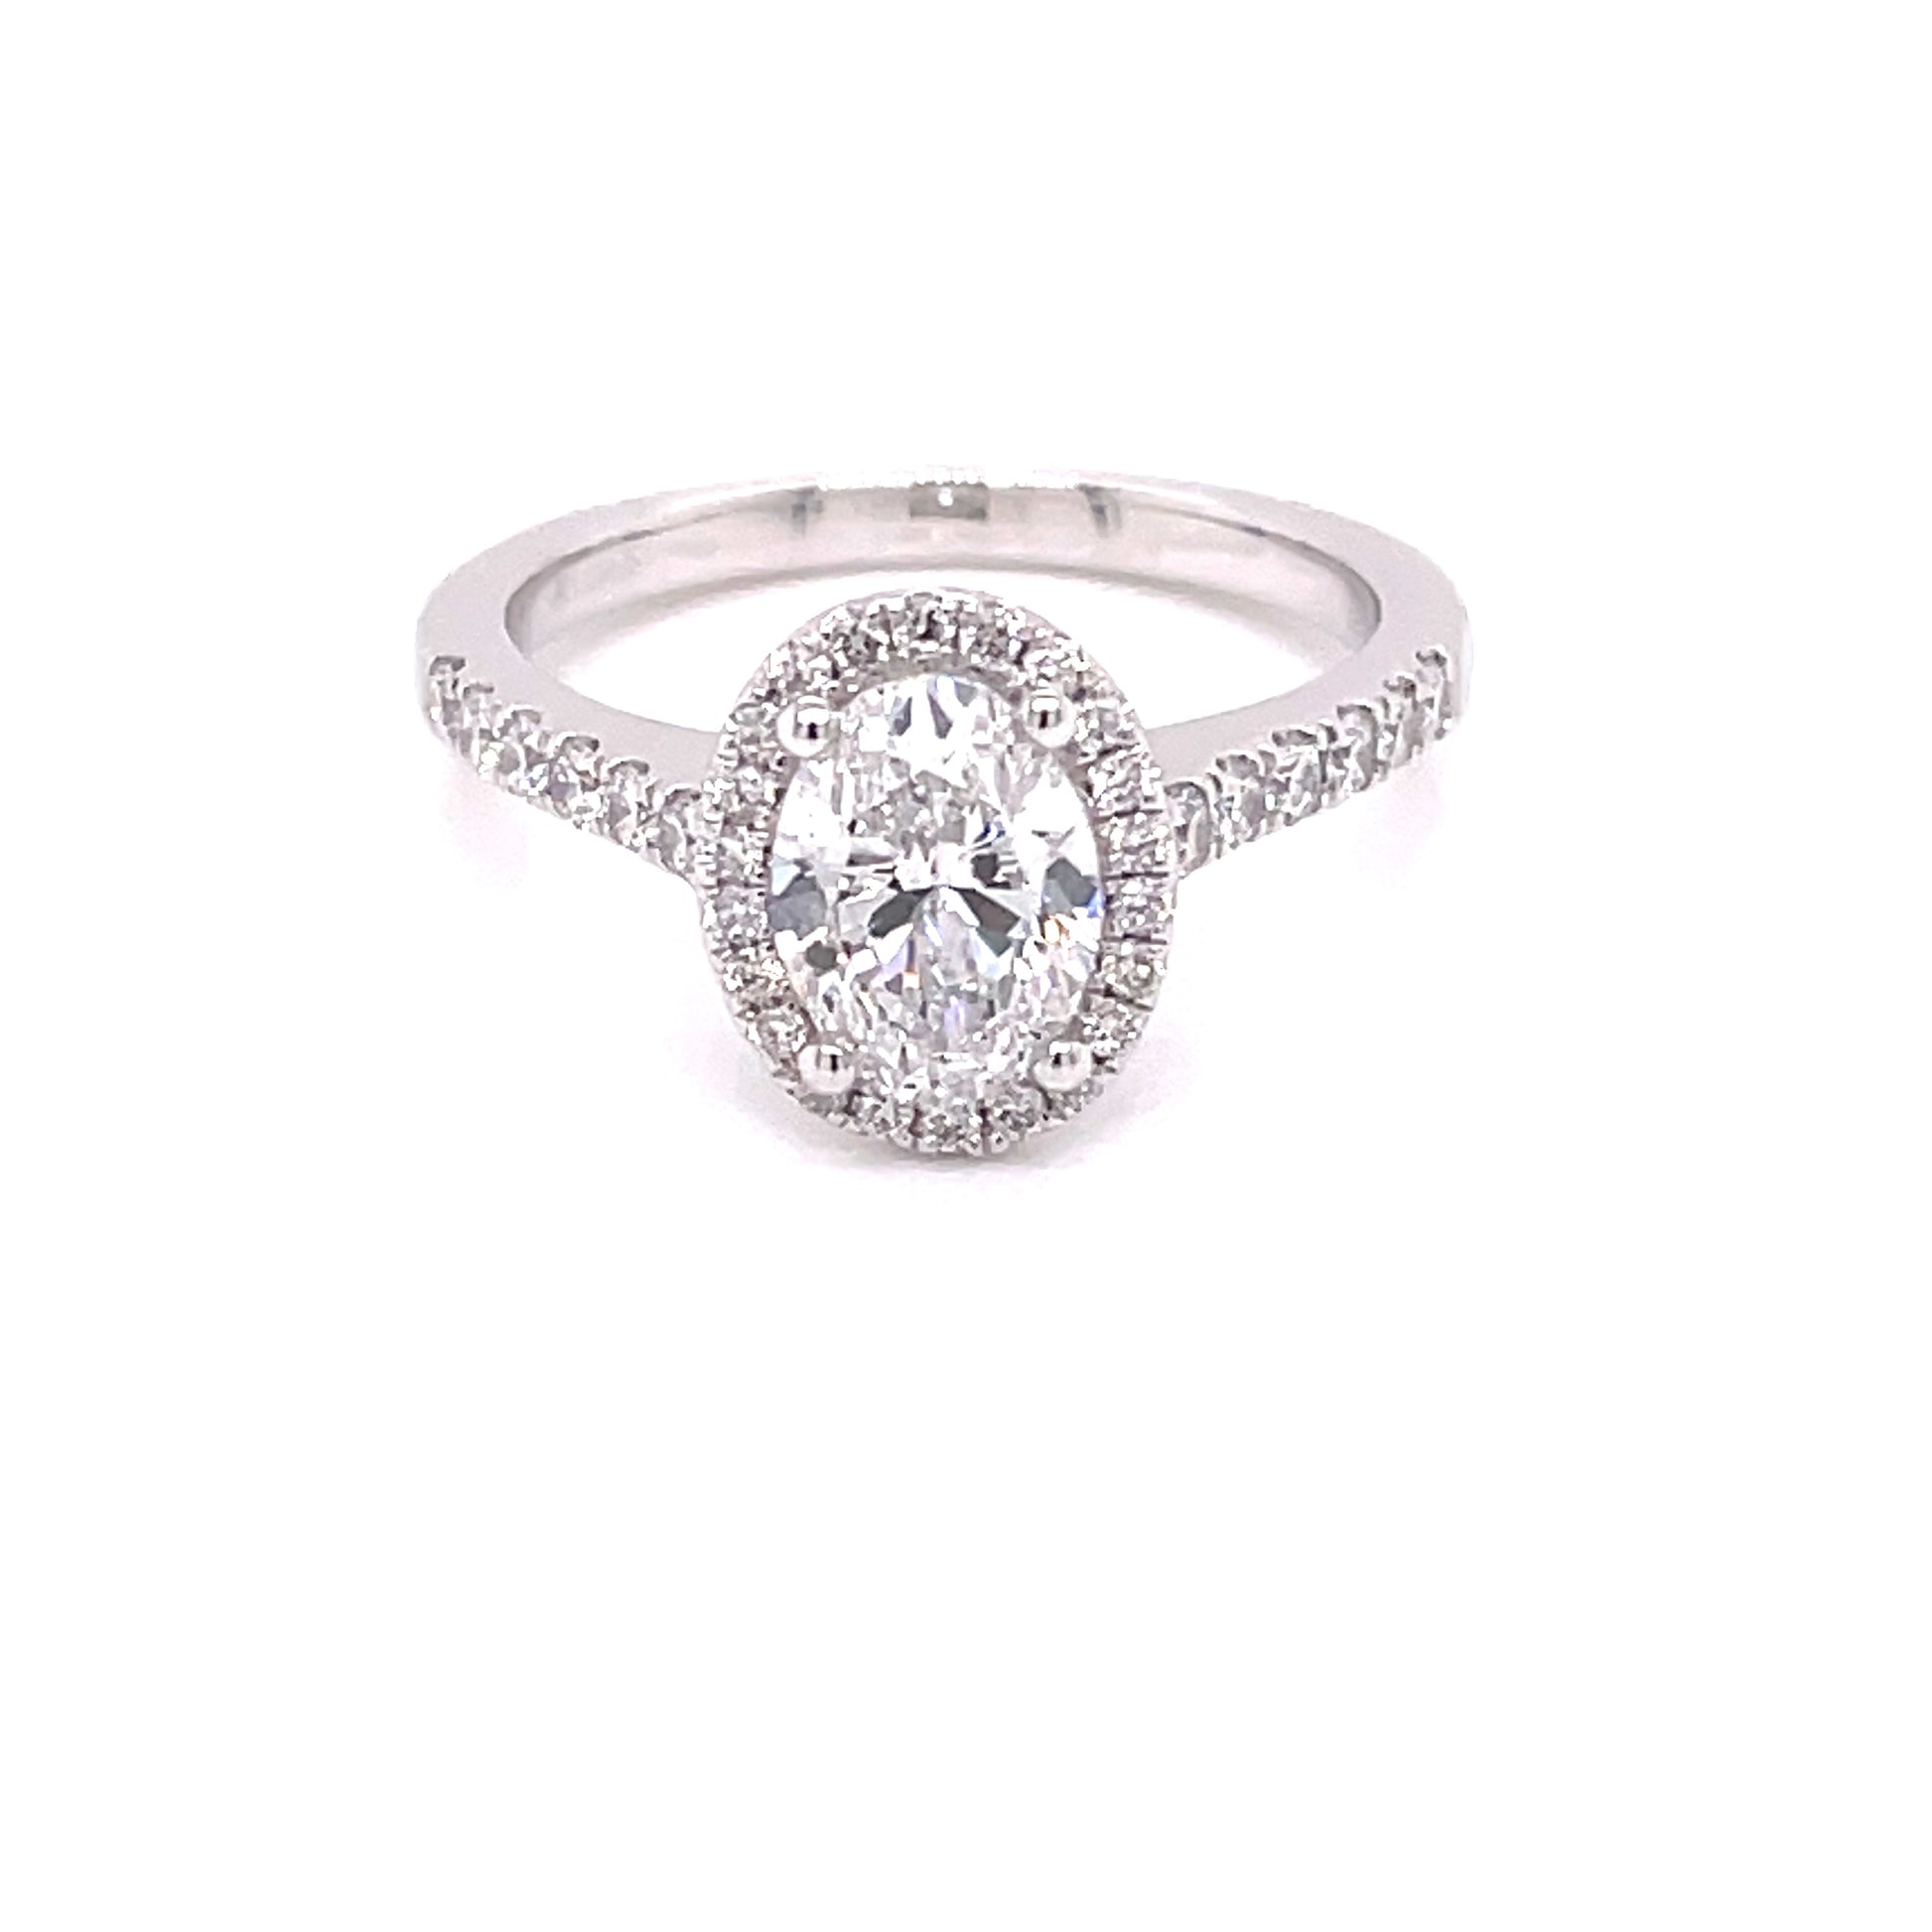 Oval Shaped Diamond Halo Style Ring - 1.34cts  Gardiner Brothers   